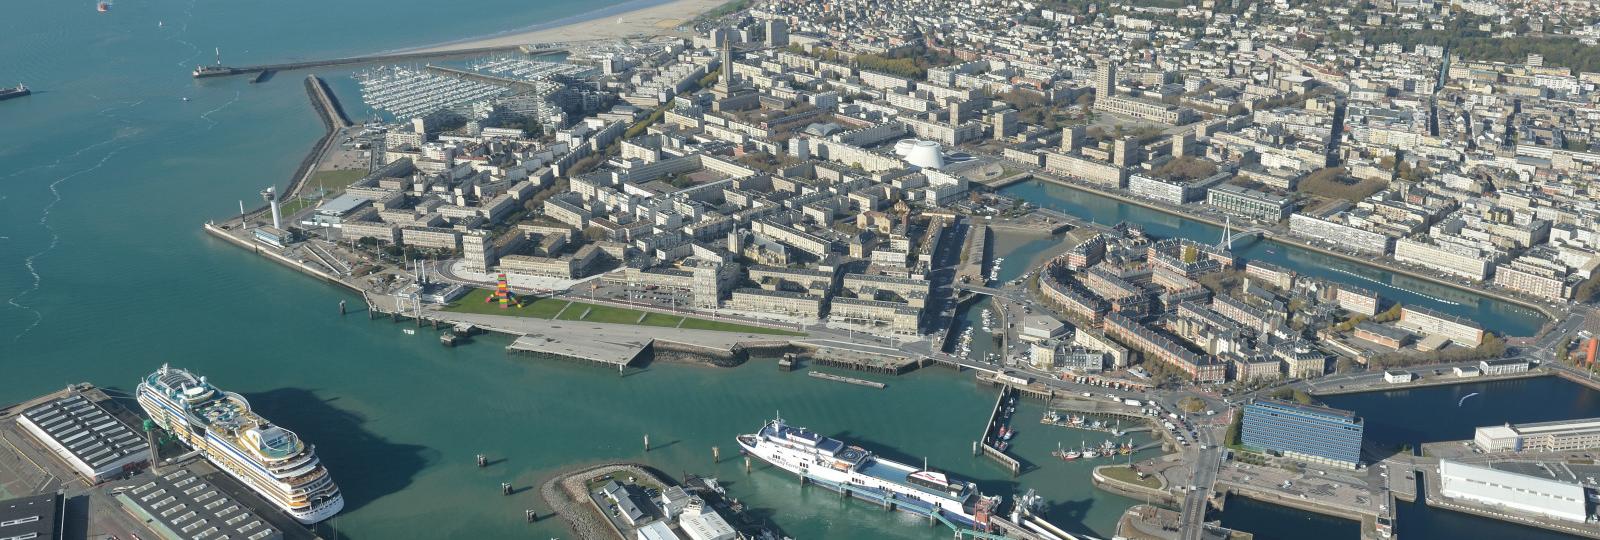 Le Havre Port Issues Tender for Quay Construction Work